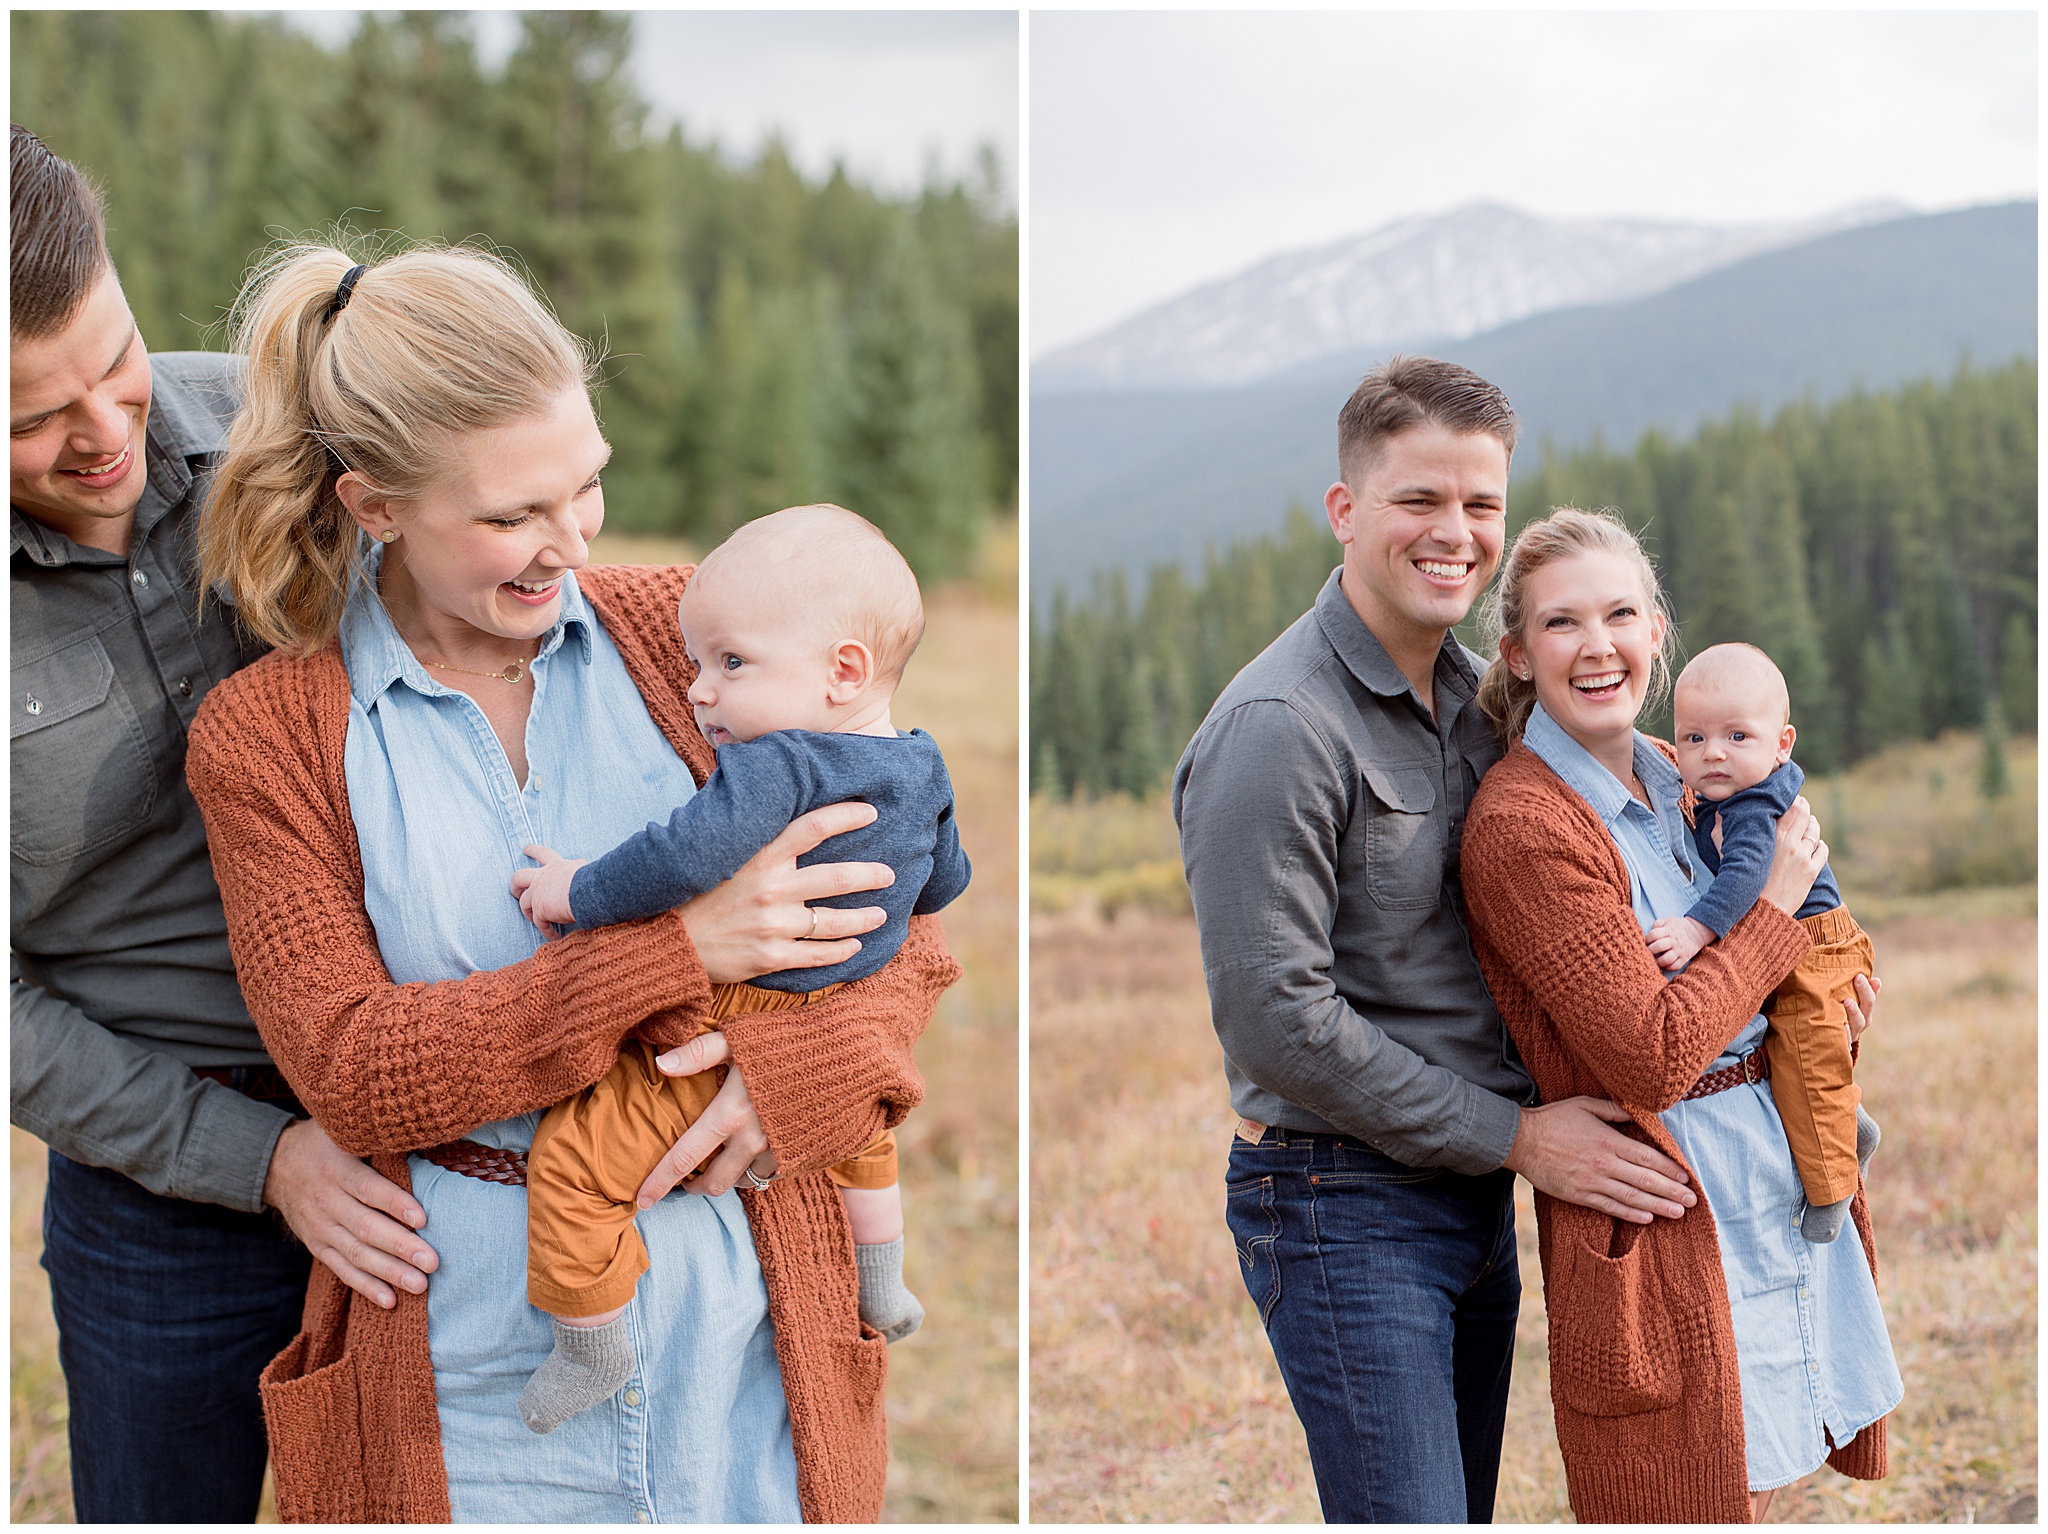 What to wear to a fall family session in Breckenridge